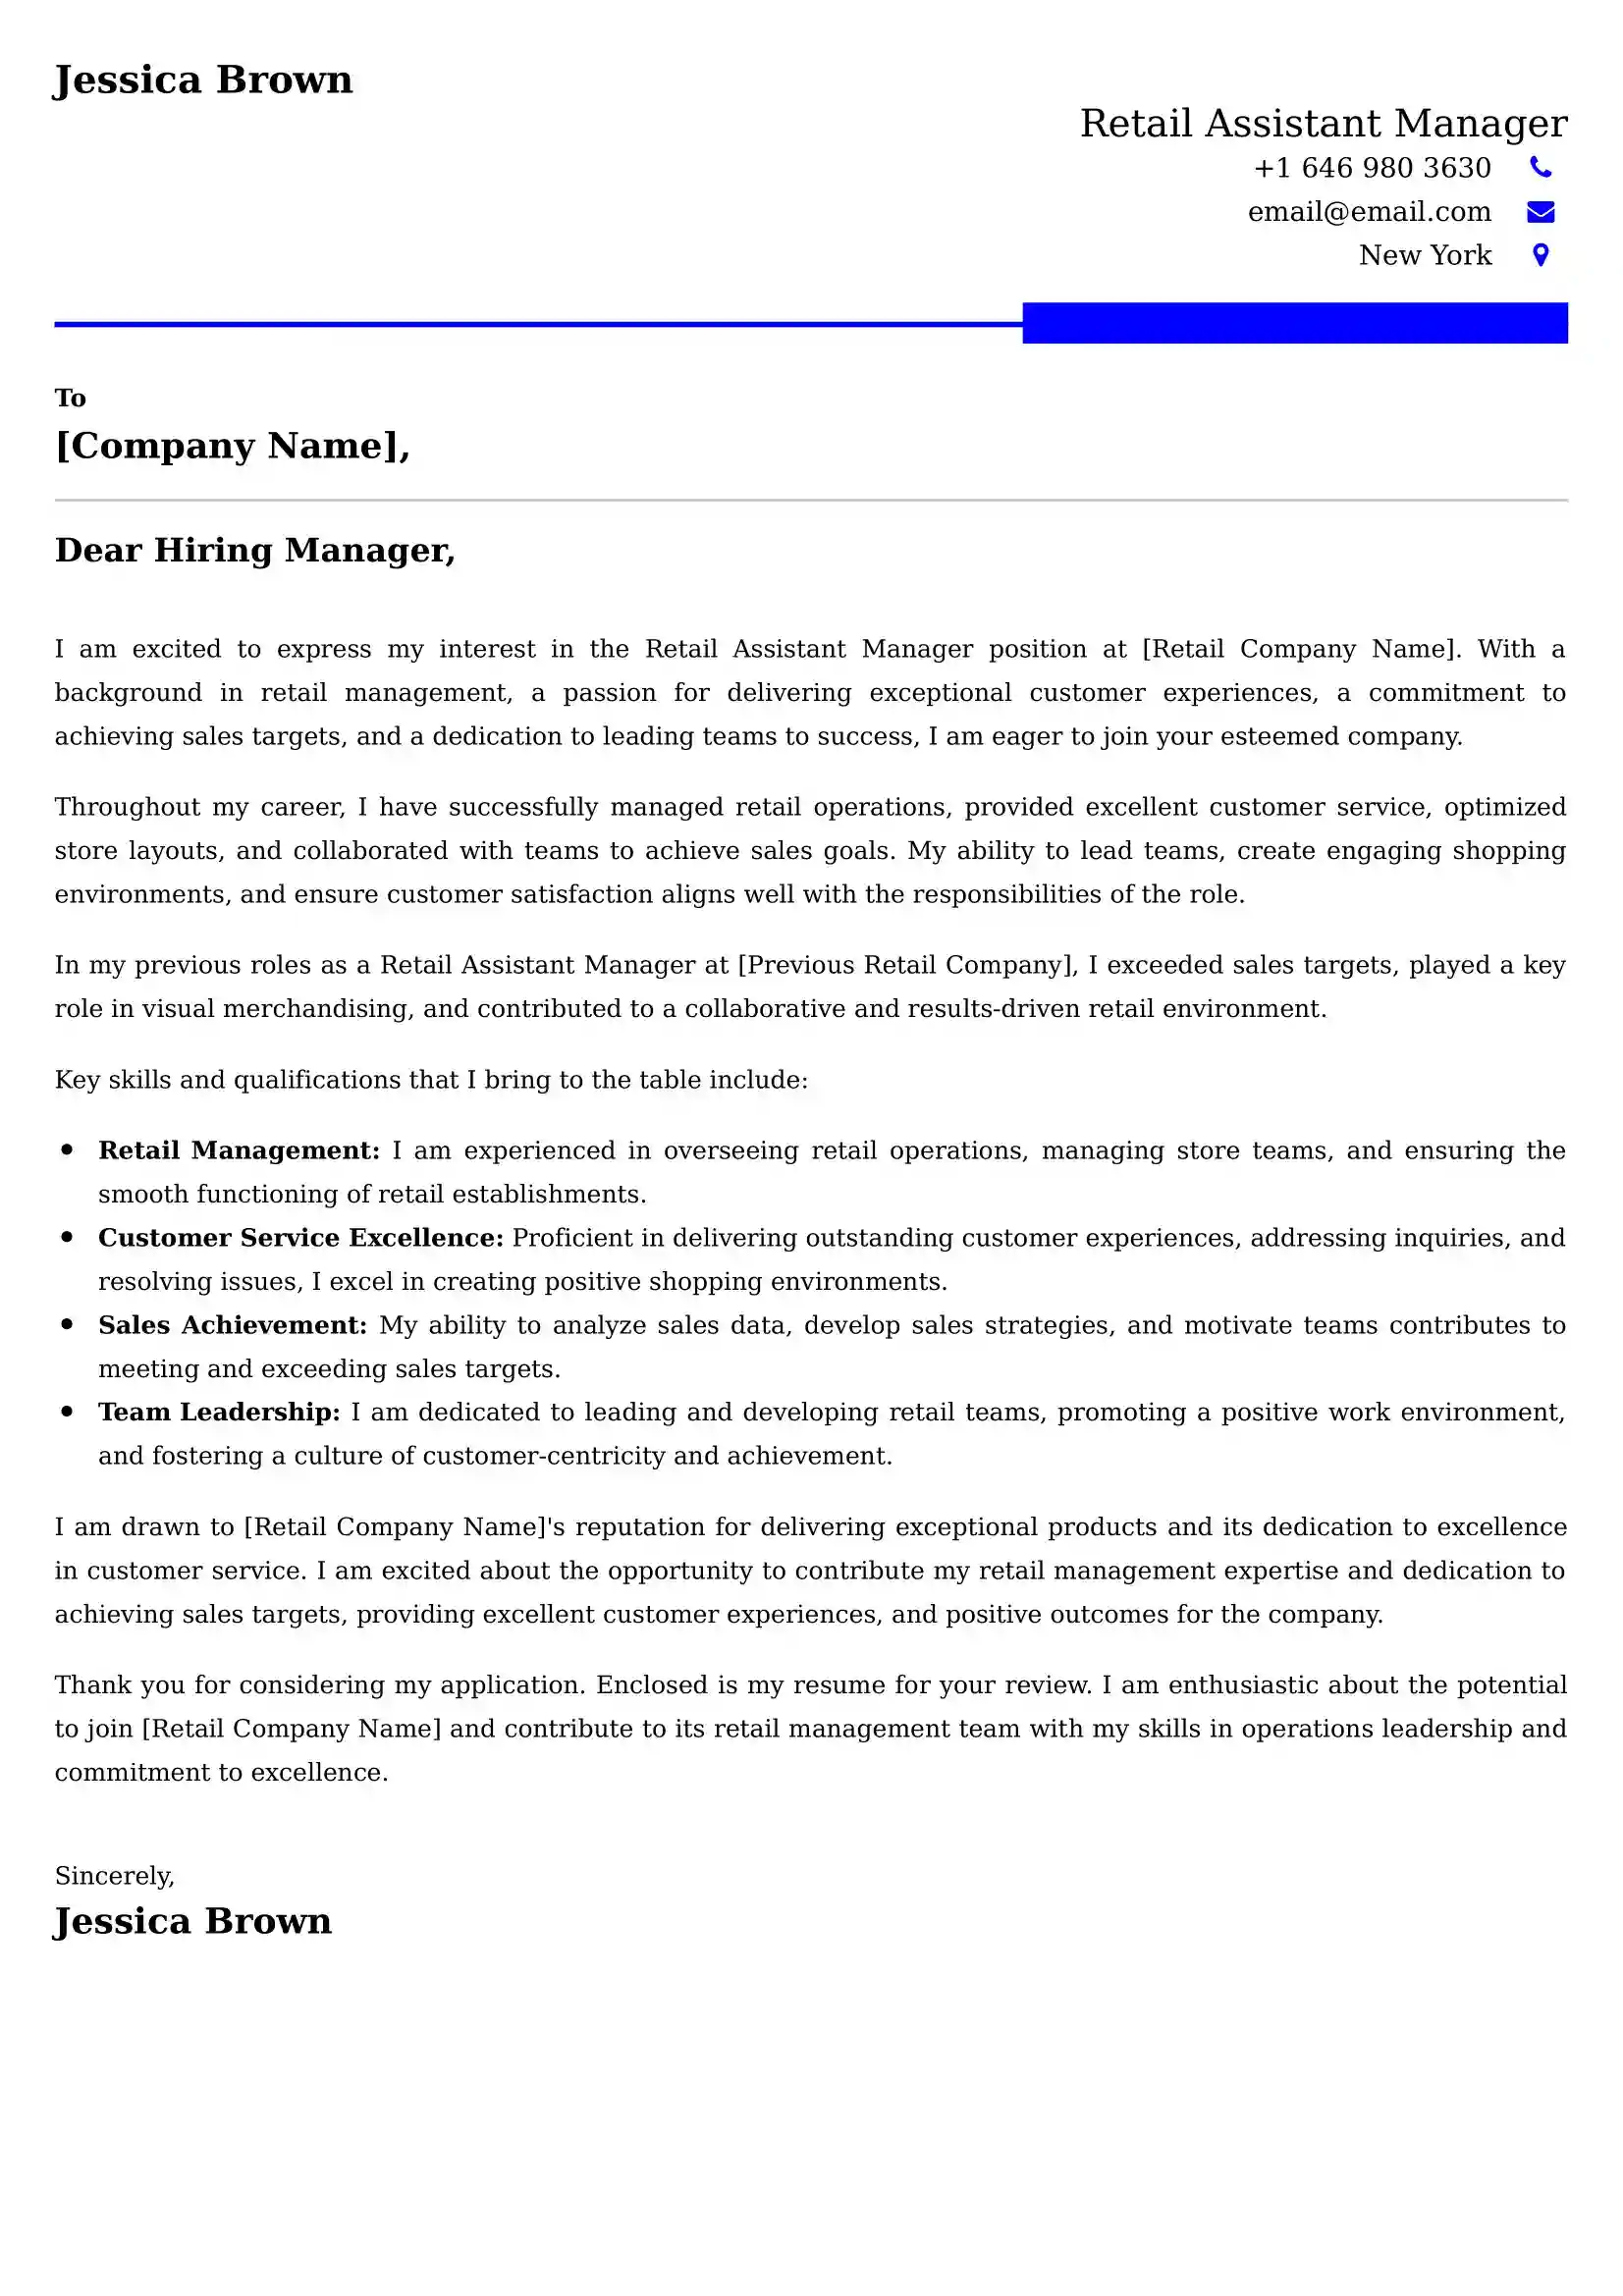 Retail Assistant Manager Cover Letter Examples - Latest UK Format